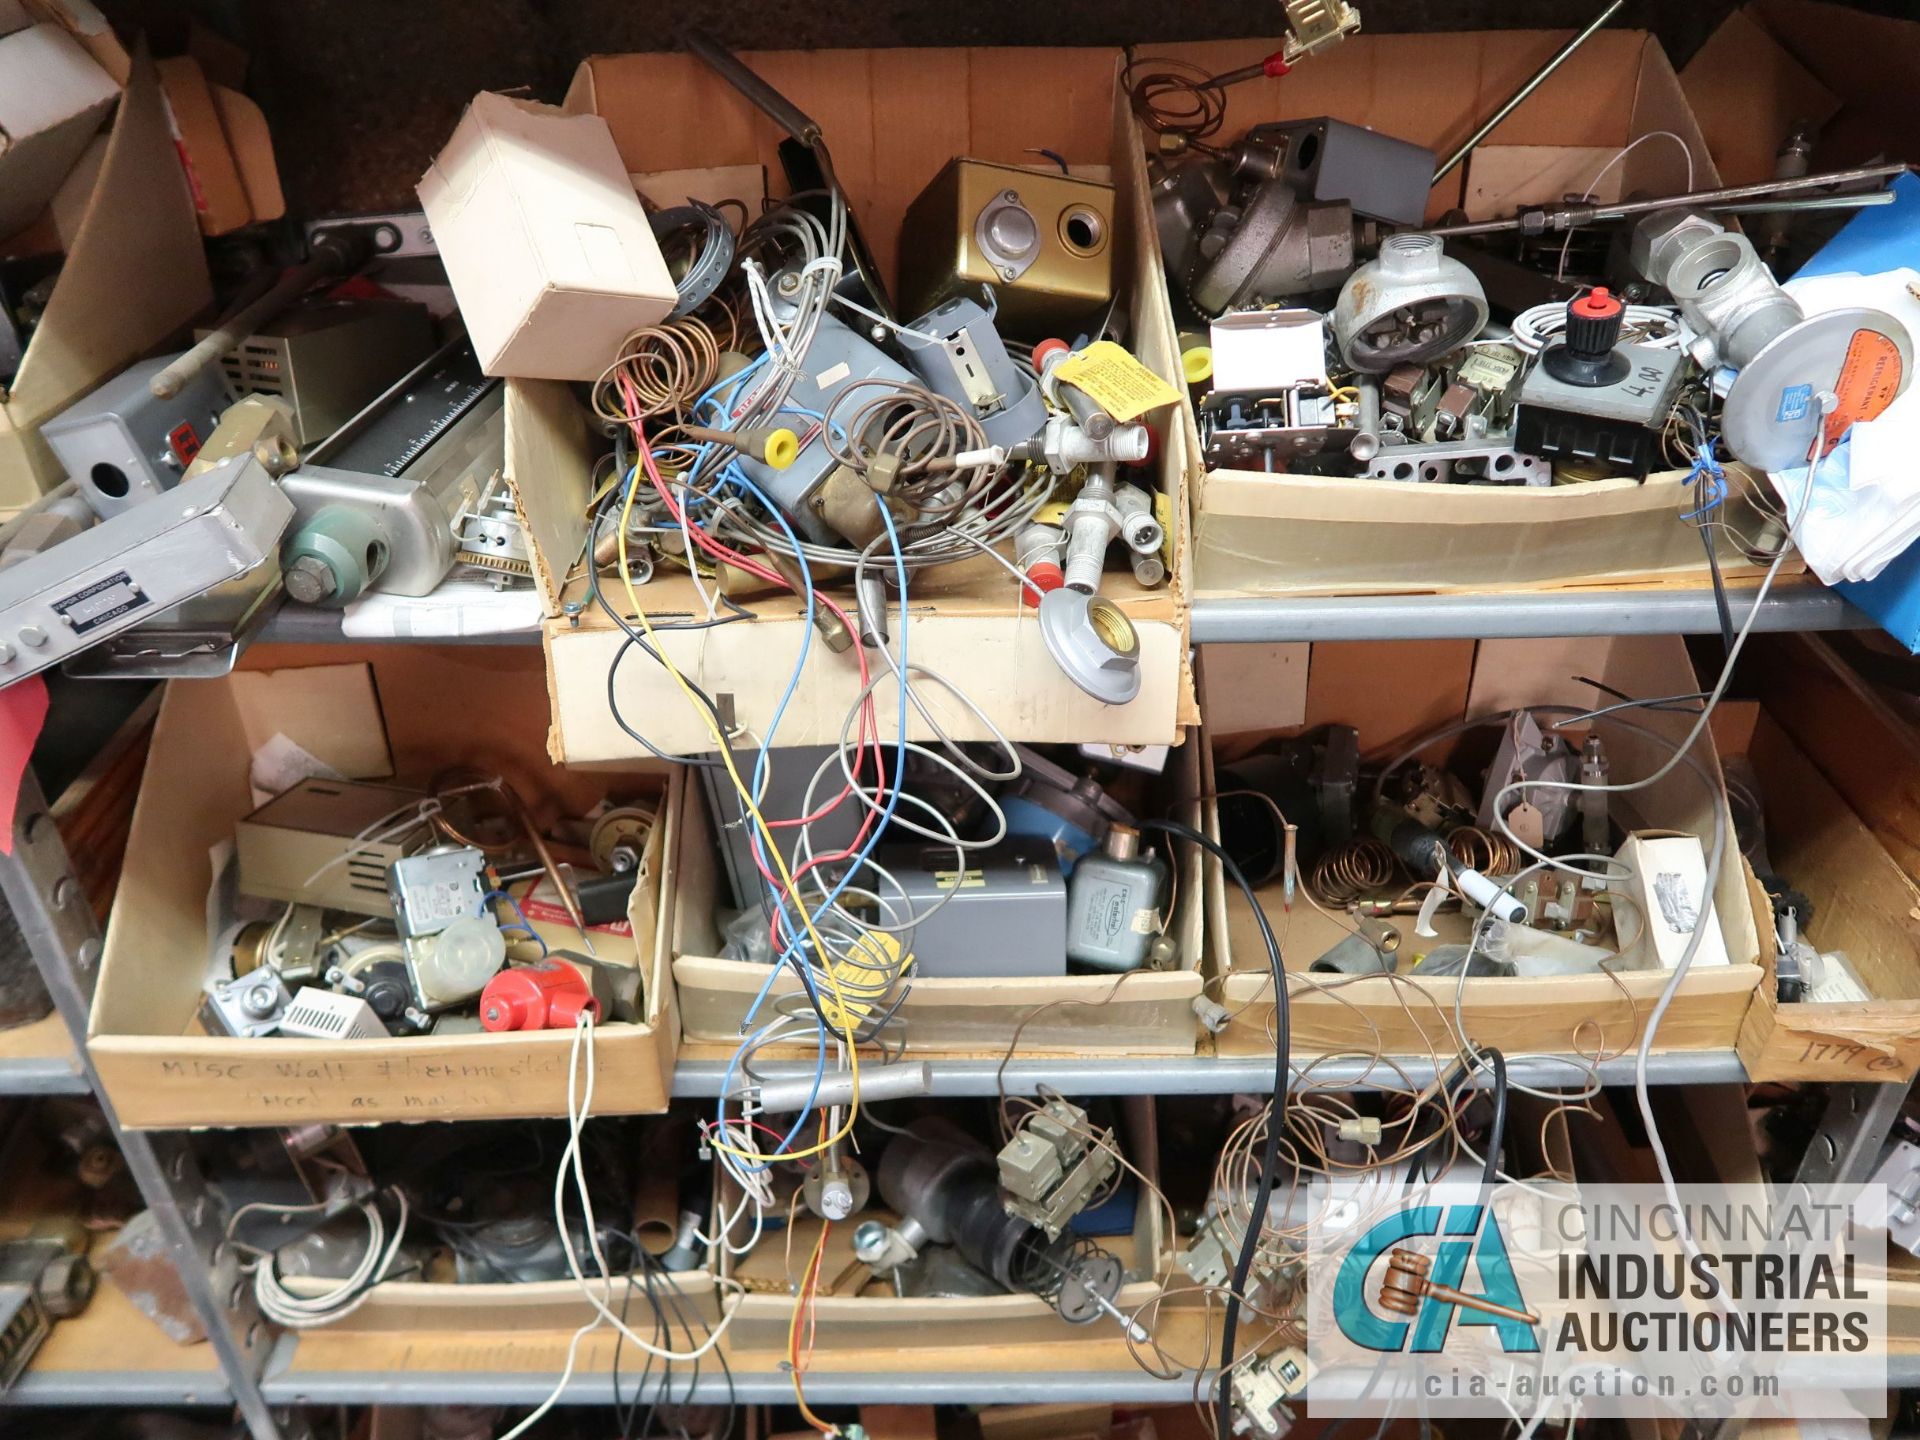 CONTENTS OF (16) SHELVES INCLUDING MISCELLANEOUS VALVES, THERMOSTATS, ANALYZERS, ELECTRICAL, CONTROL - Image 16 of 47